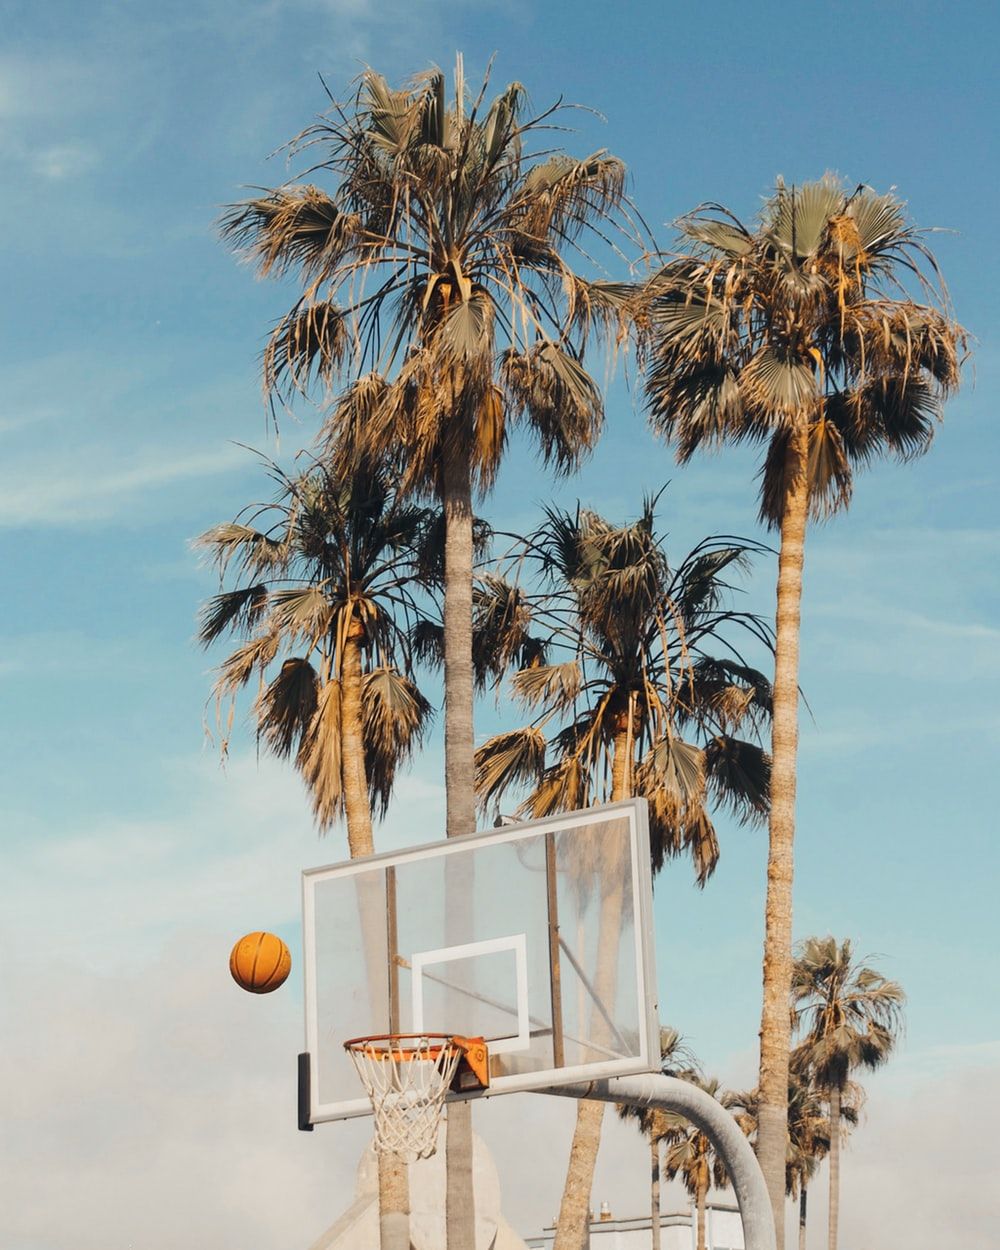 white and gray basketball system beside coconut trees photo